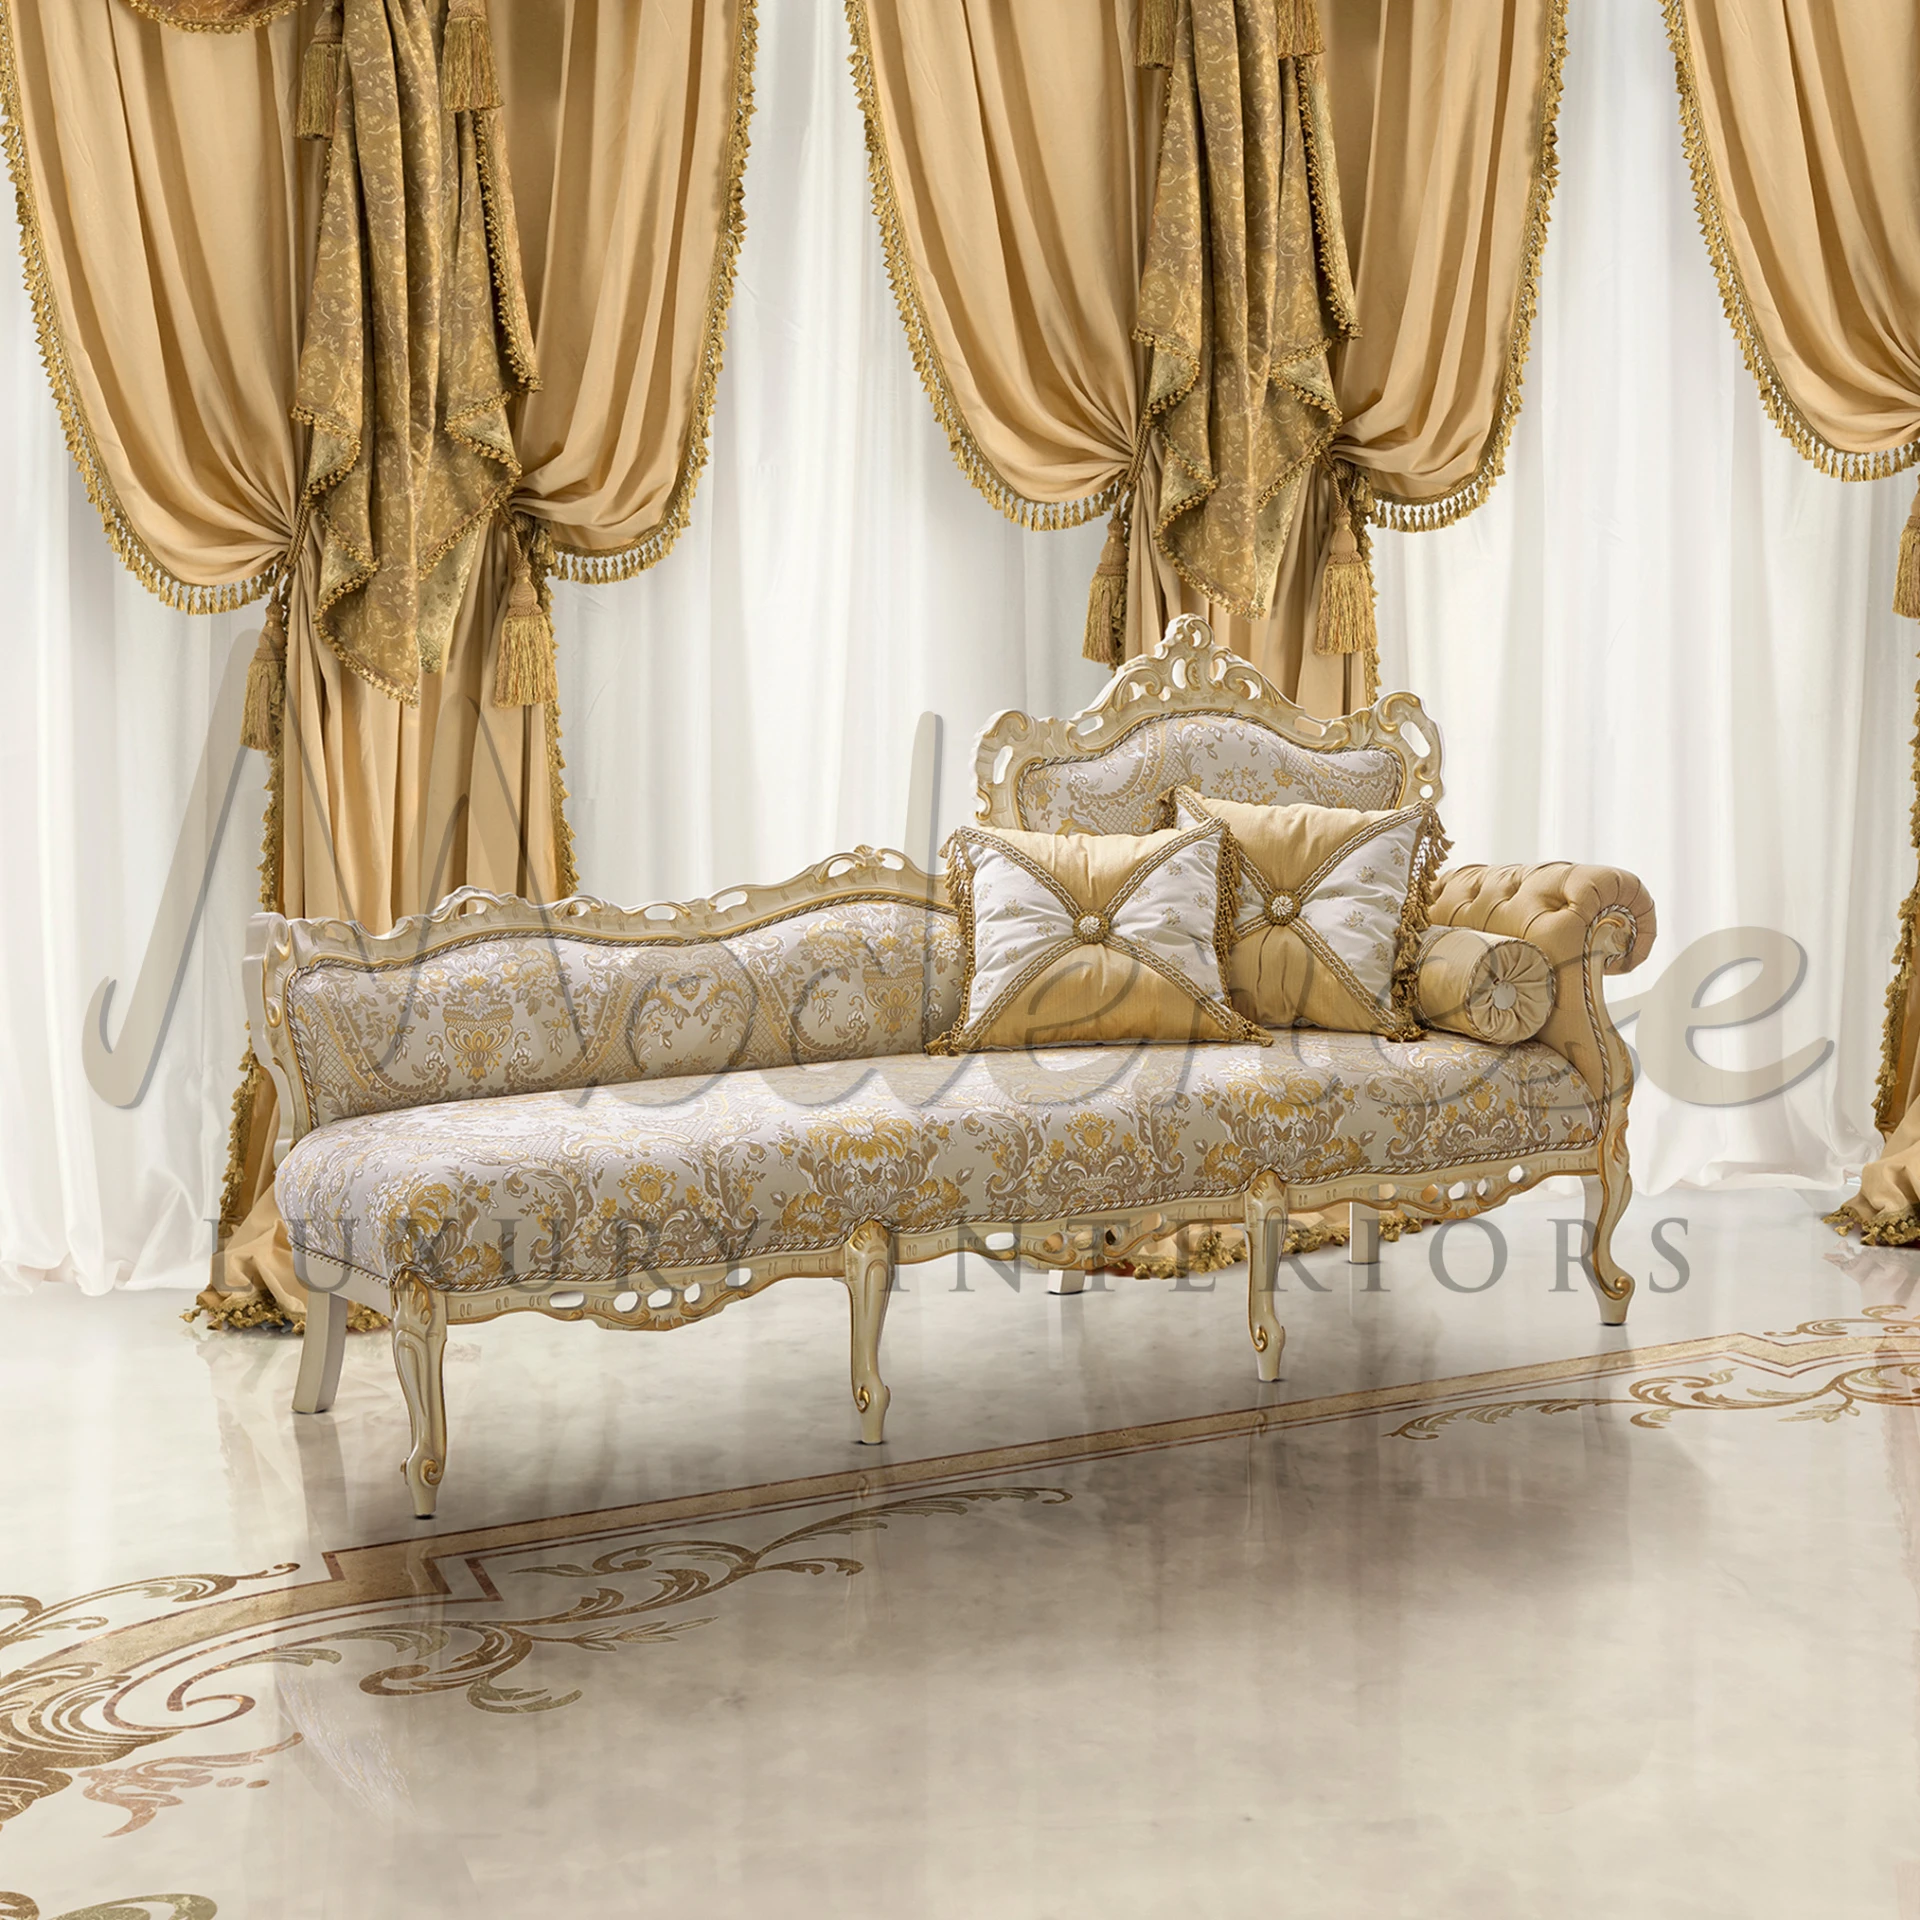 Elegant carved bench in gold with luxurious patterned upholstery and accent pillows.                                                                           